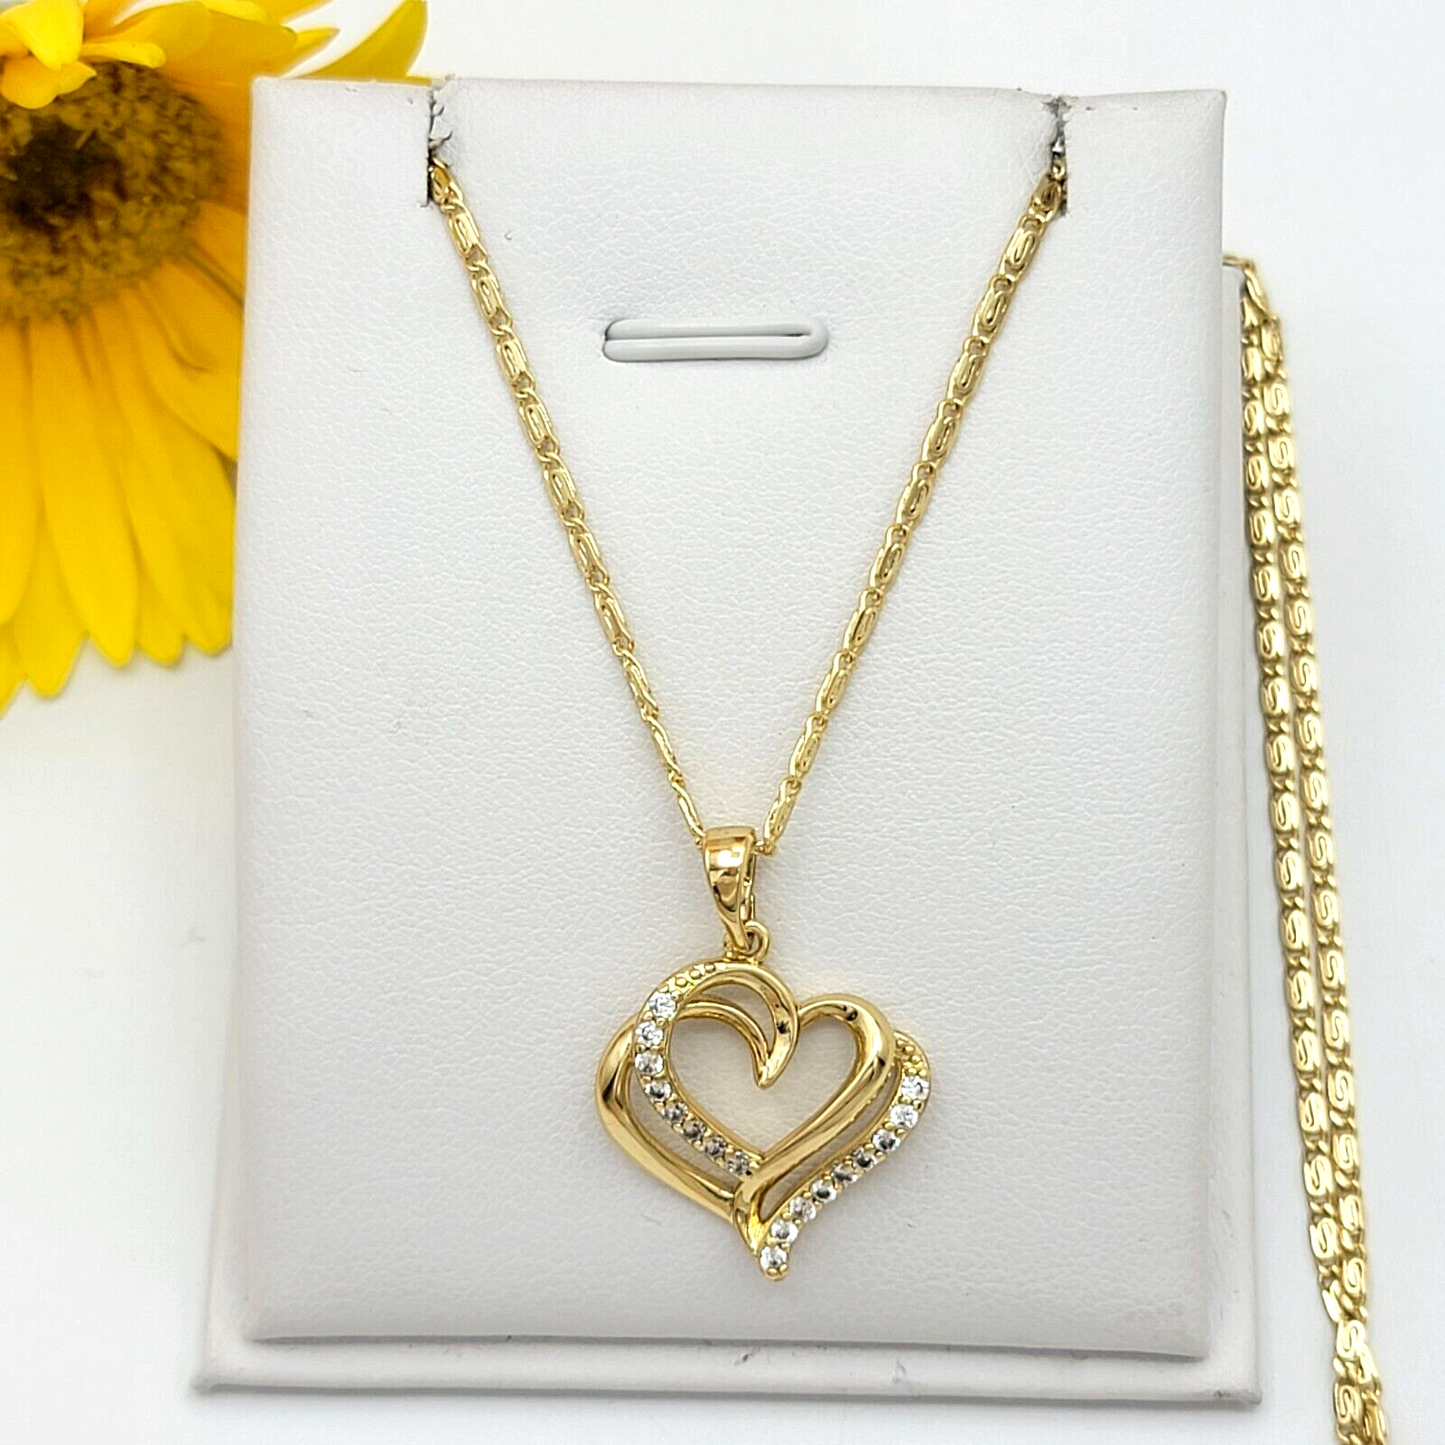 Necklaces - 14K Gold Plated. Crystal Double HEART Pendant & Chain.